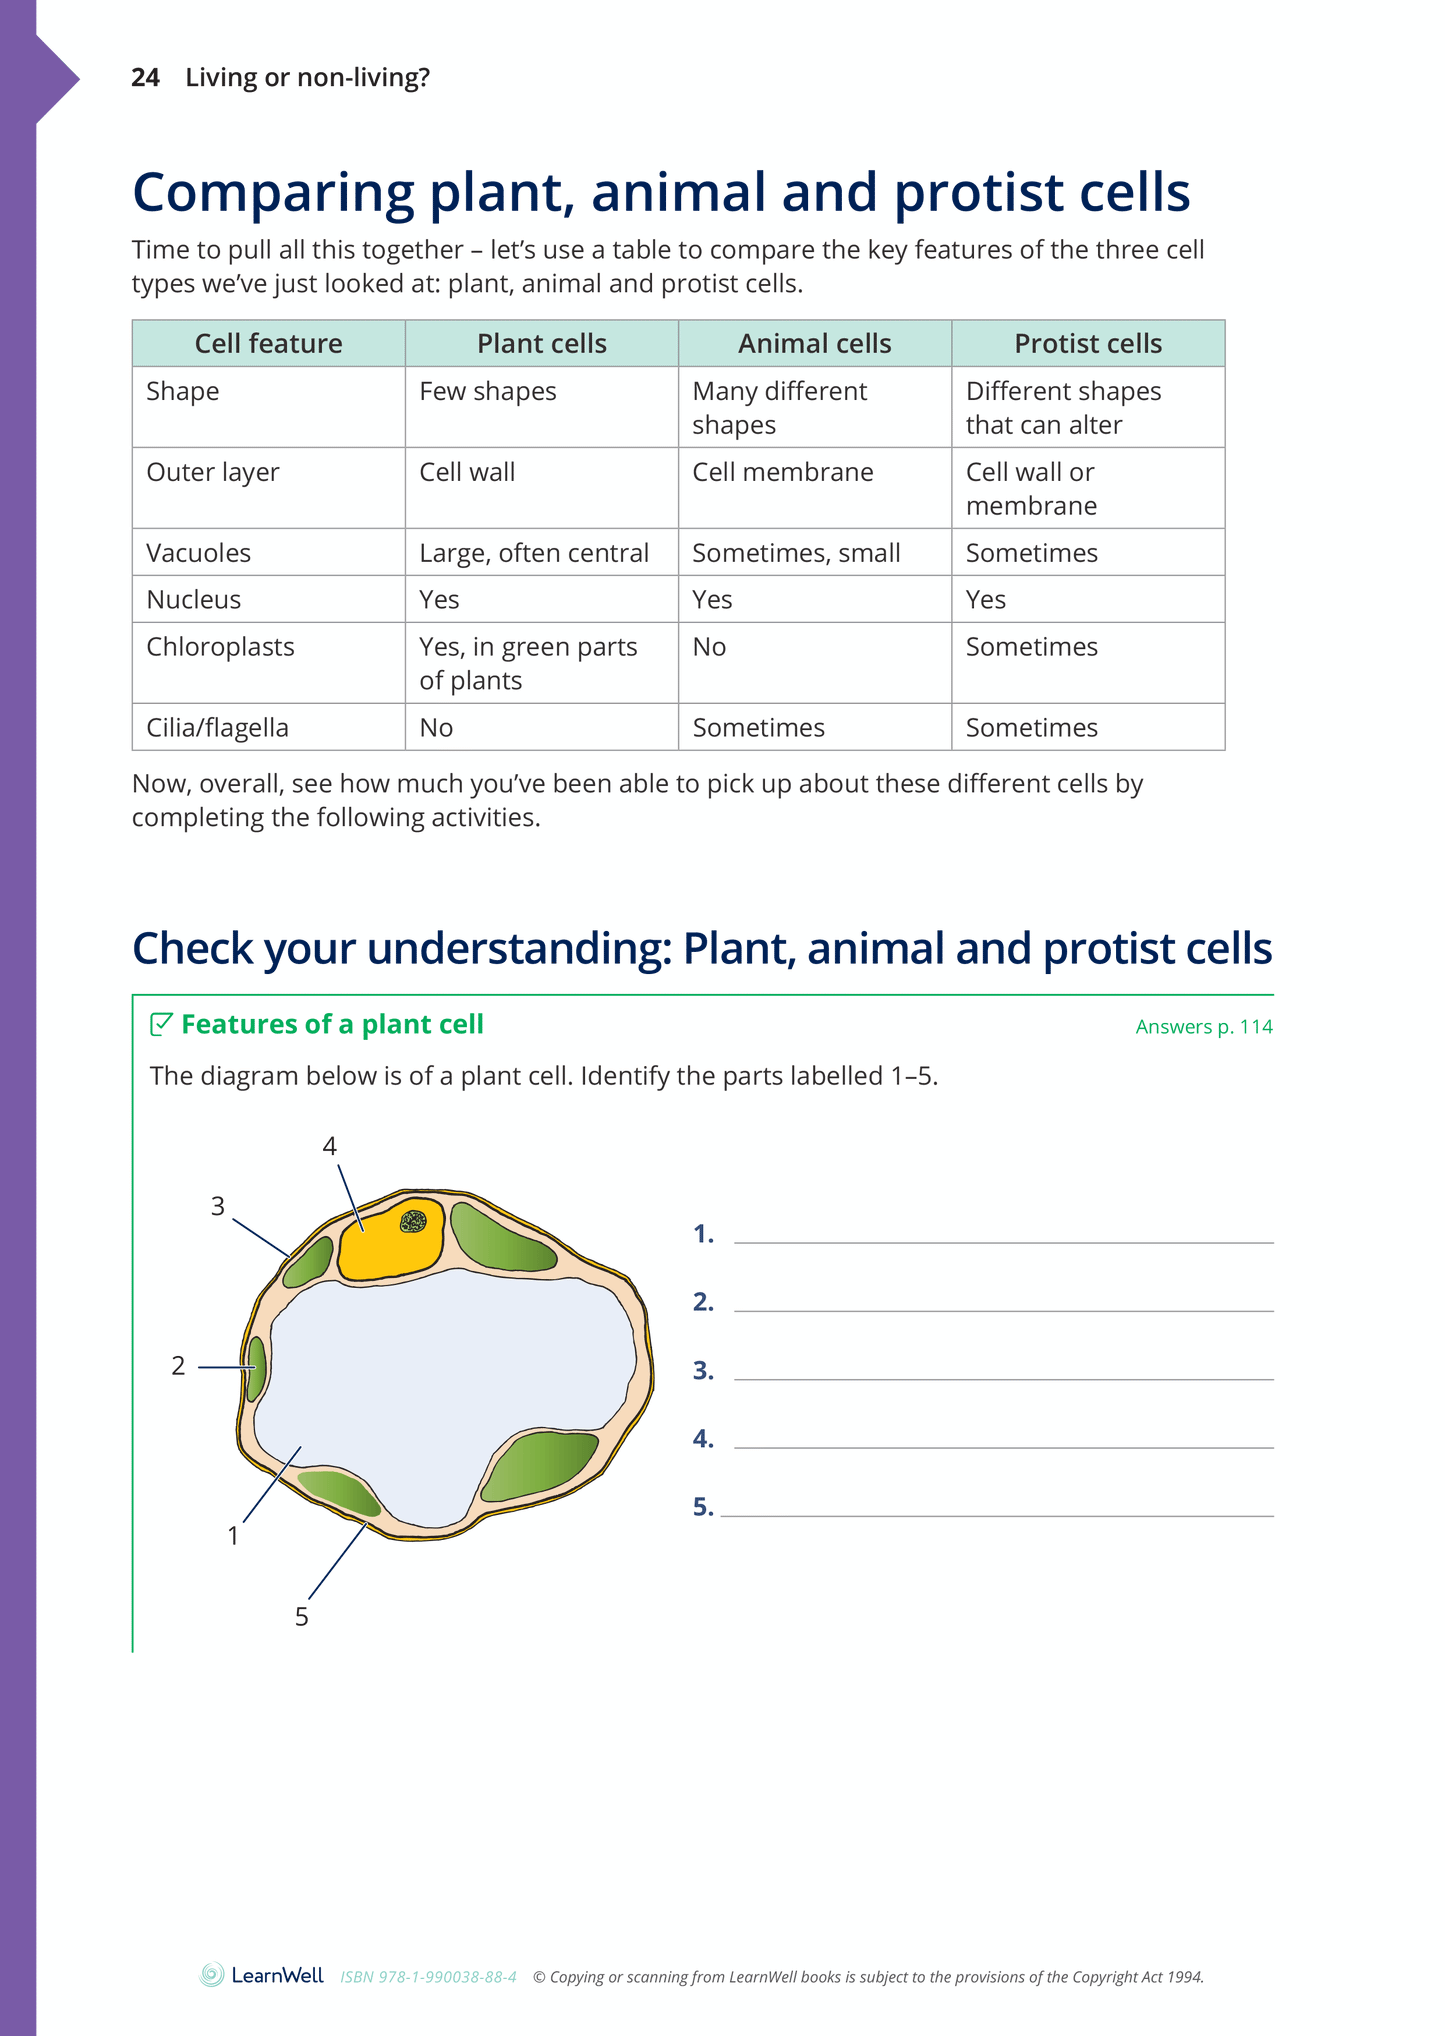 Year 9 Living World Learning Guide